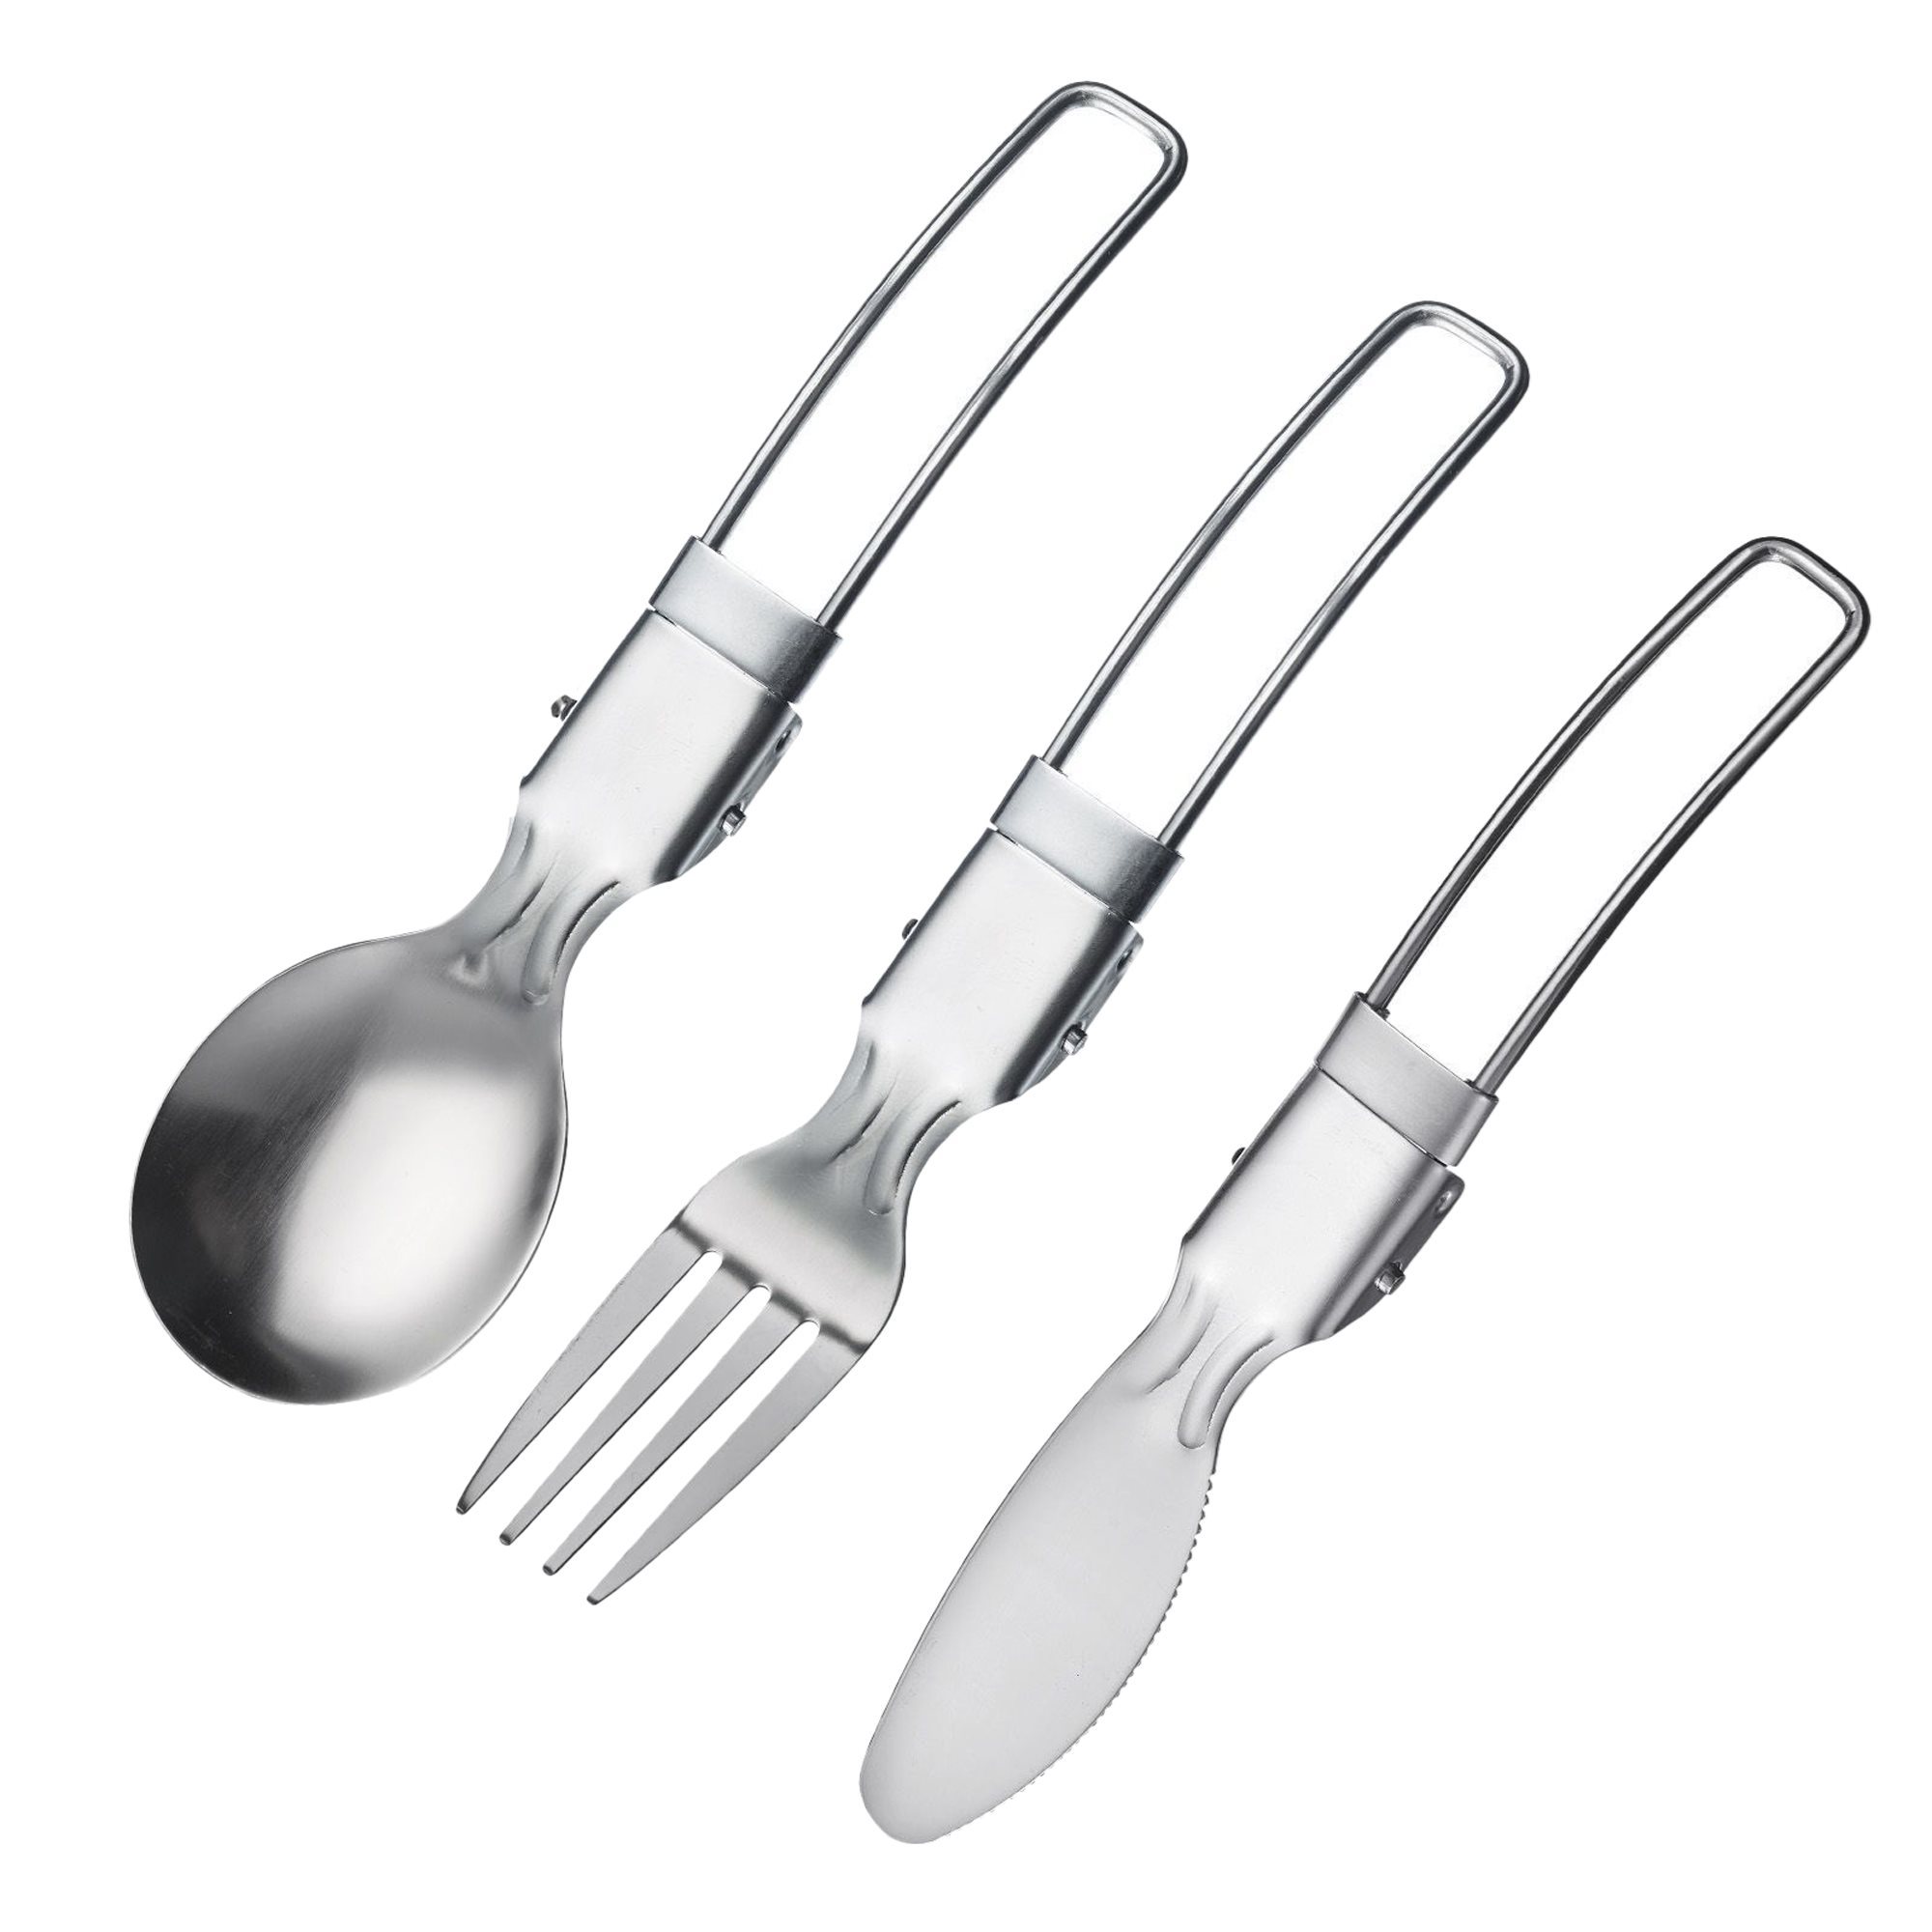 3pcs Outdoor Travel Stainless Steel Folding Cutlery Set With Knife